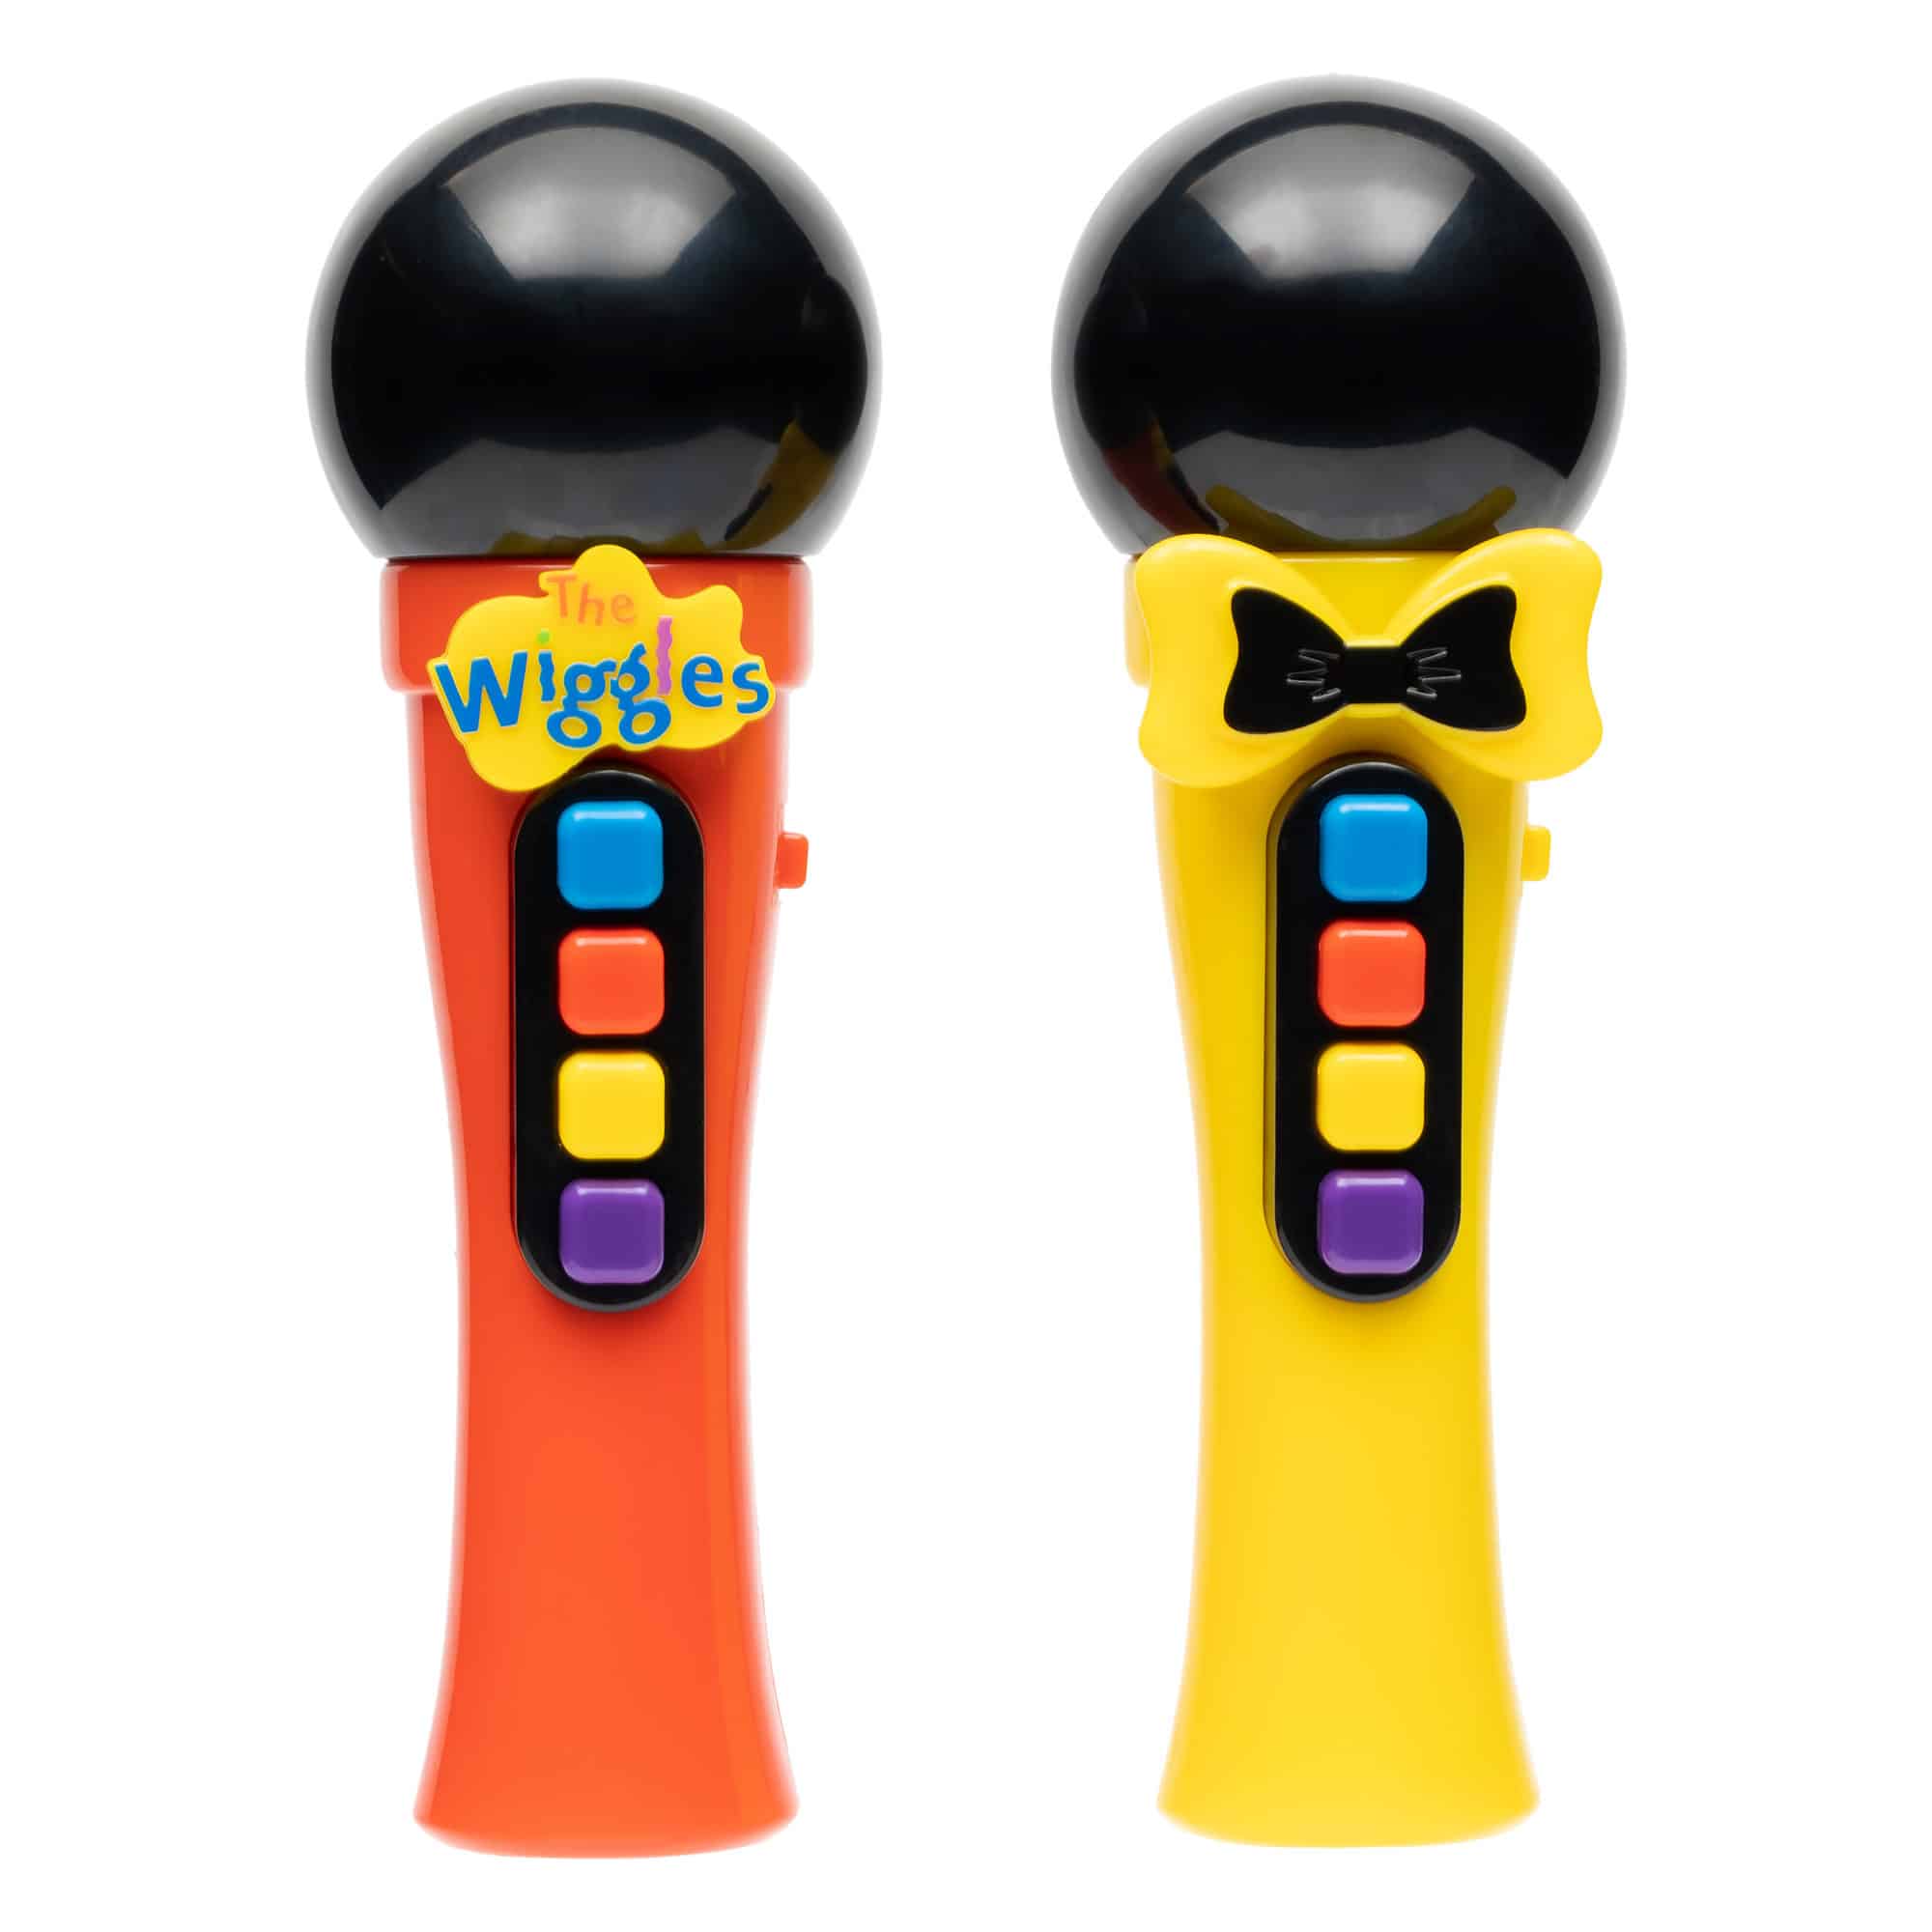 The Wiggles - Sing Along Microphone Assortment